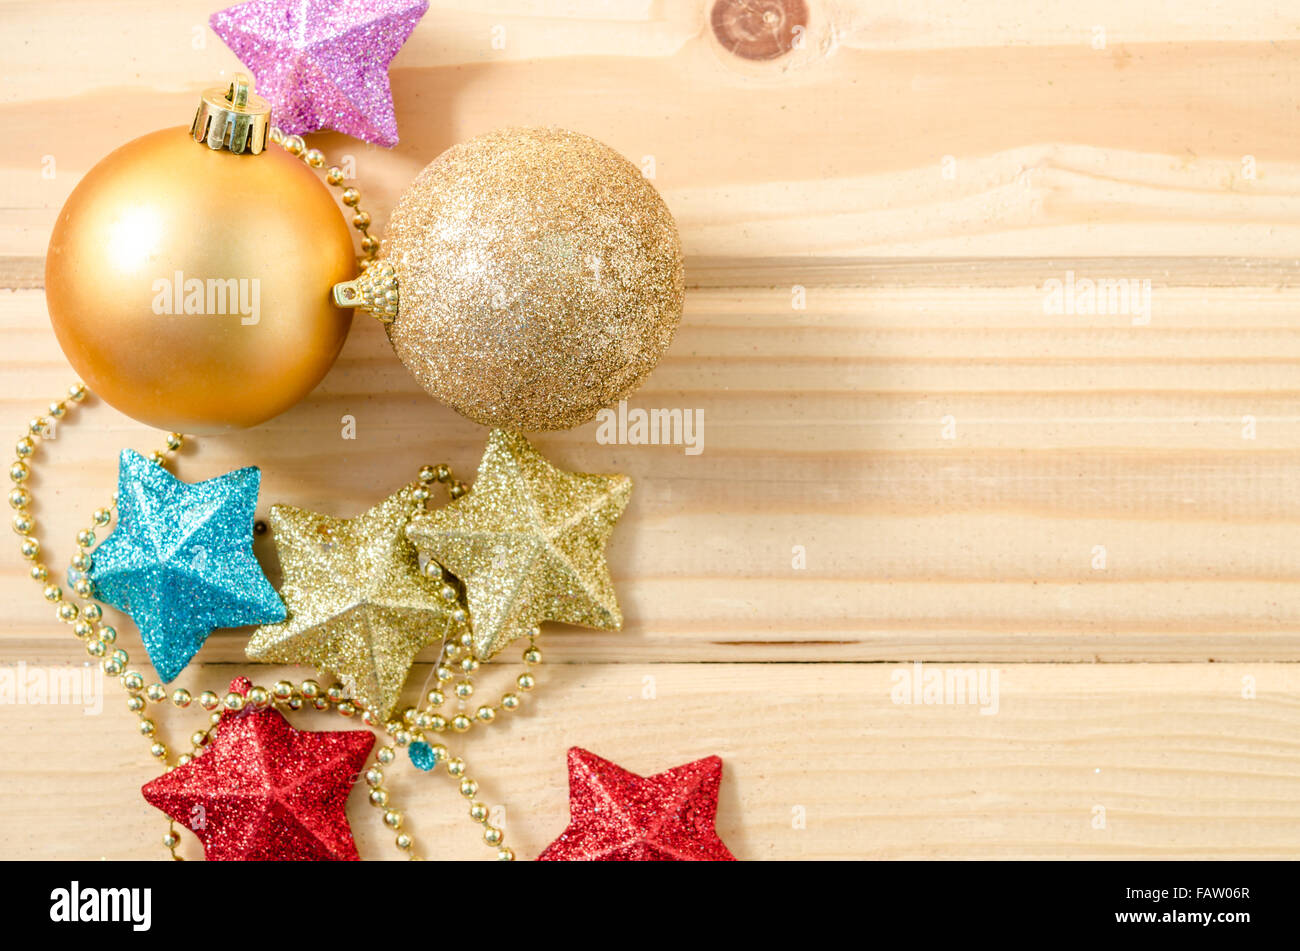 Christmas decorations on wooden background. Stock Photo